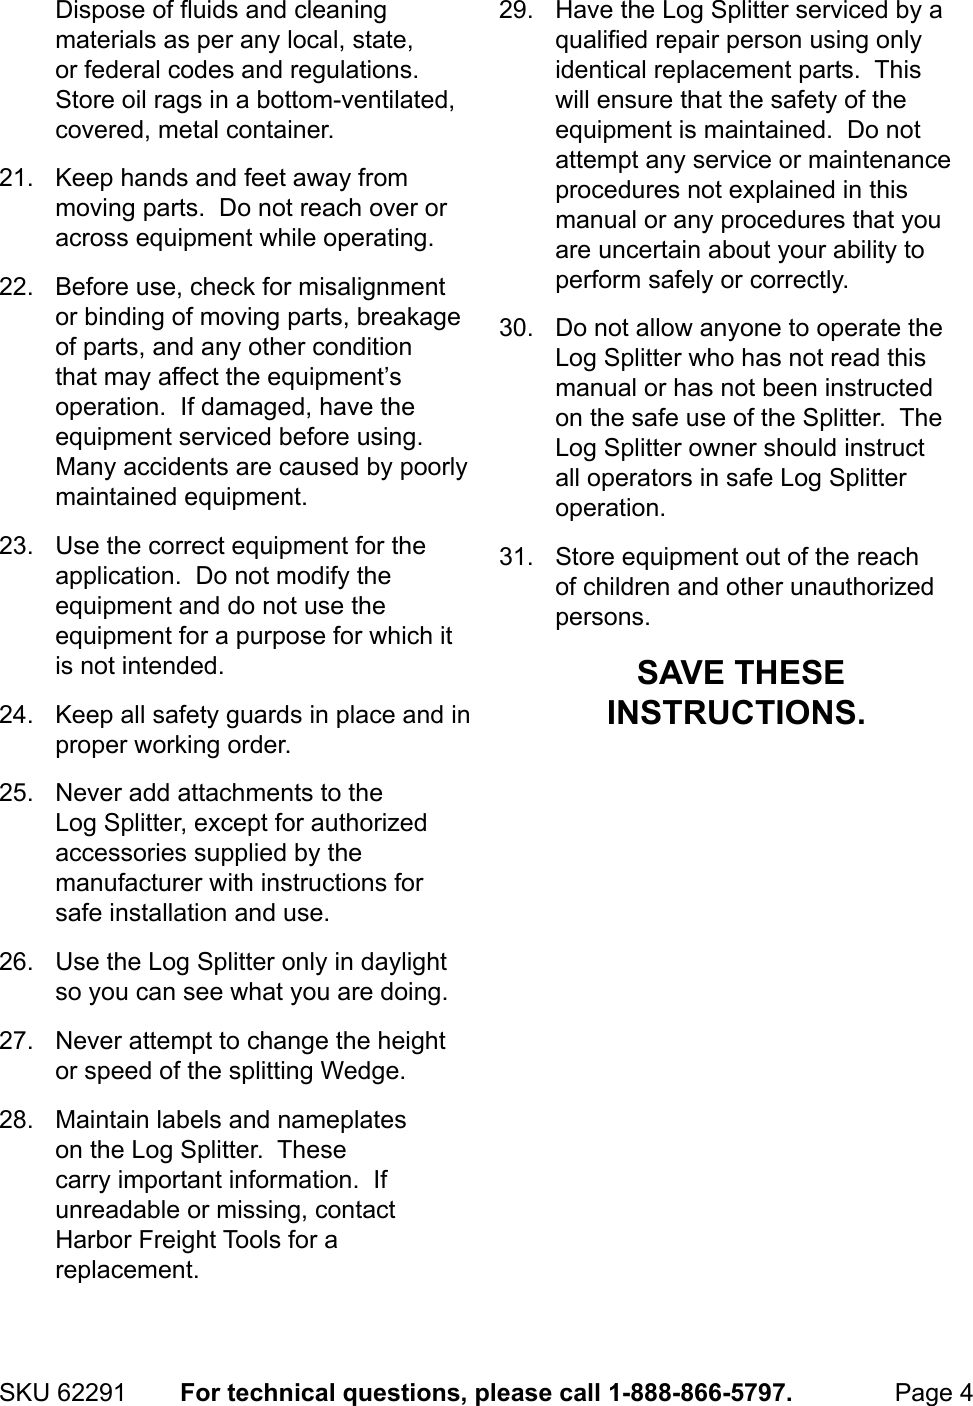 Page 4 of 12 - Manual For The 62291 10 Ton Hydraulic Log Splitter